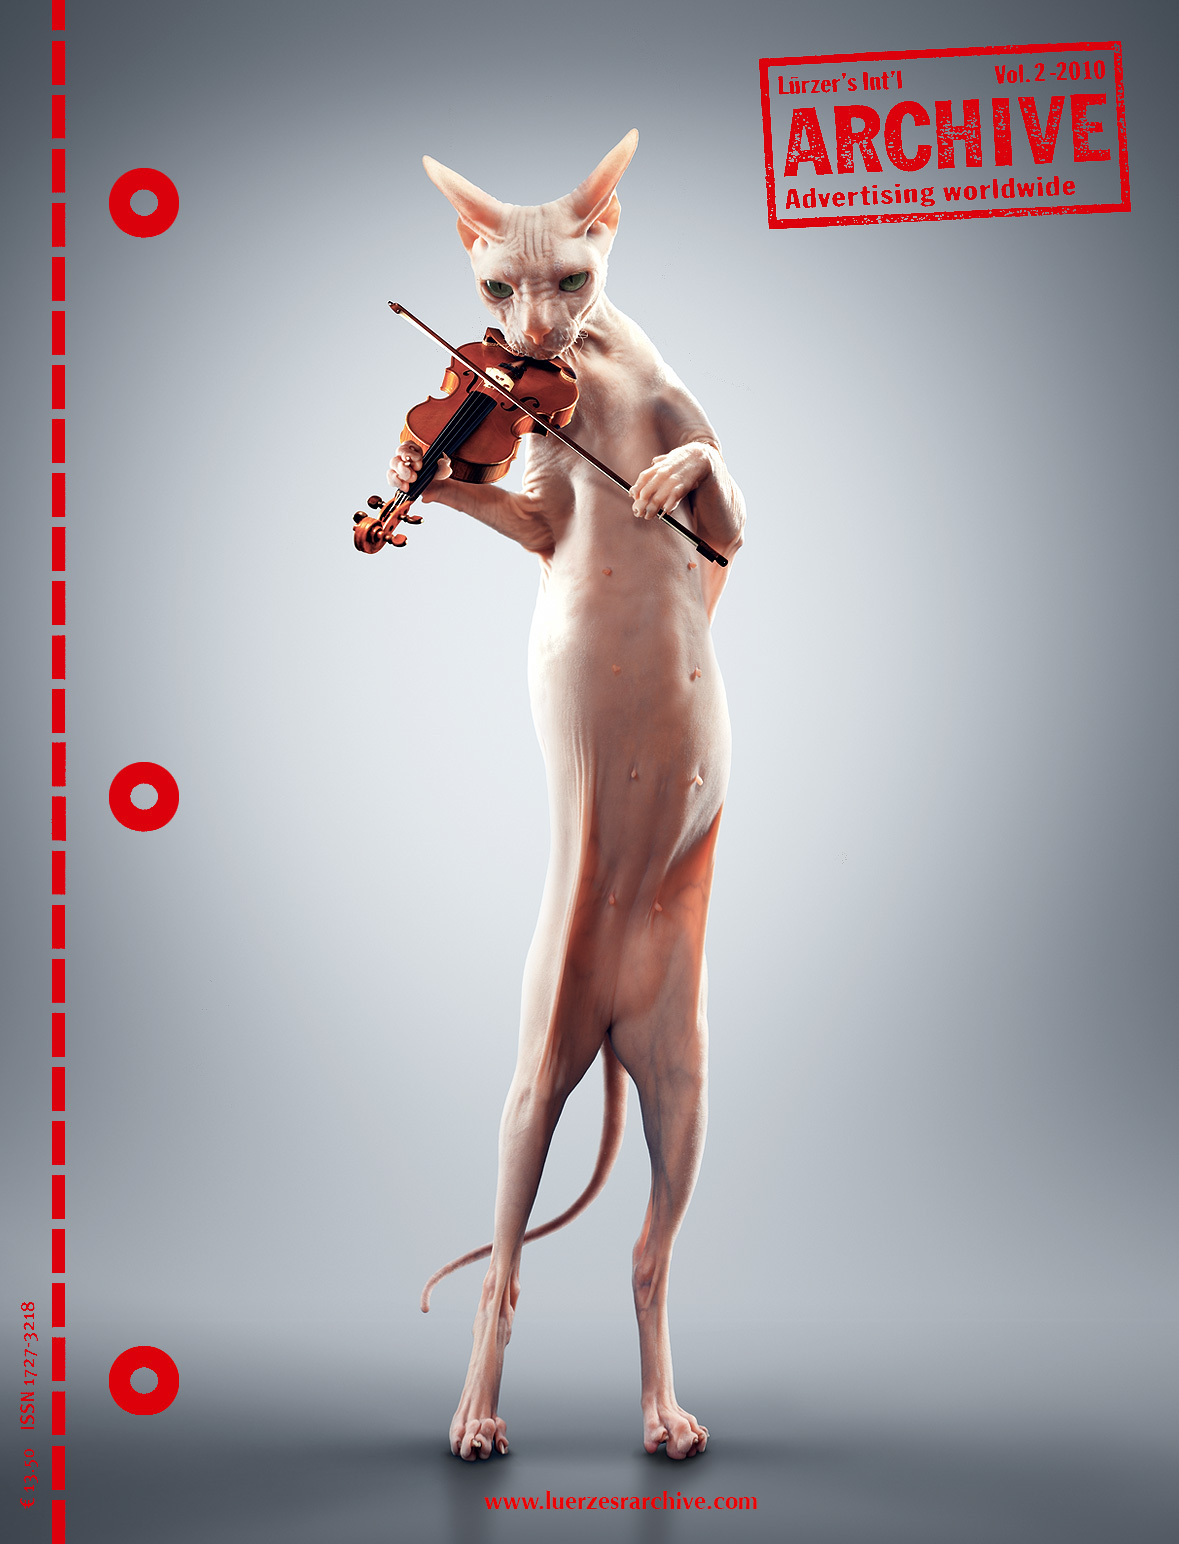 bold Cat sphinx violine high-end post-prodaction retouch Archive contest winner poster print